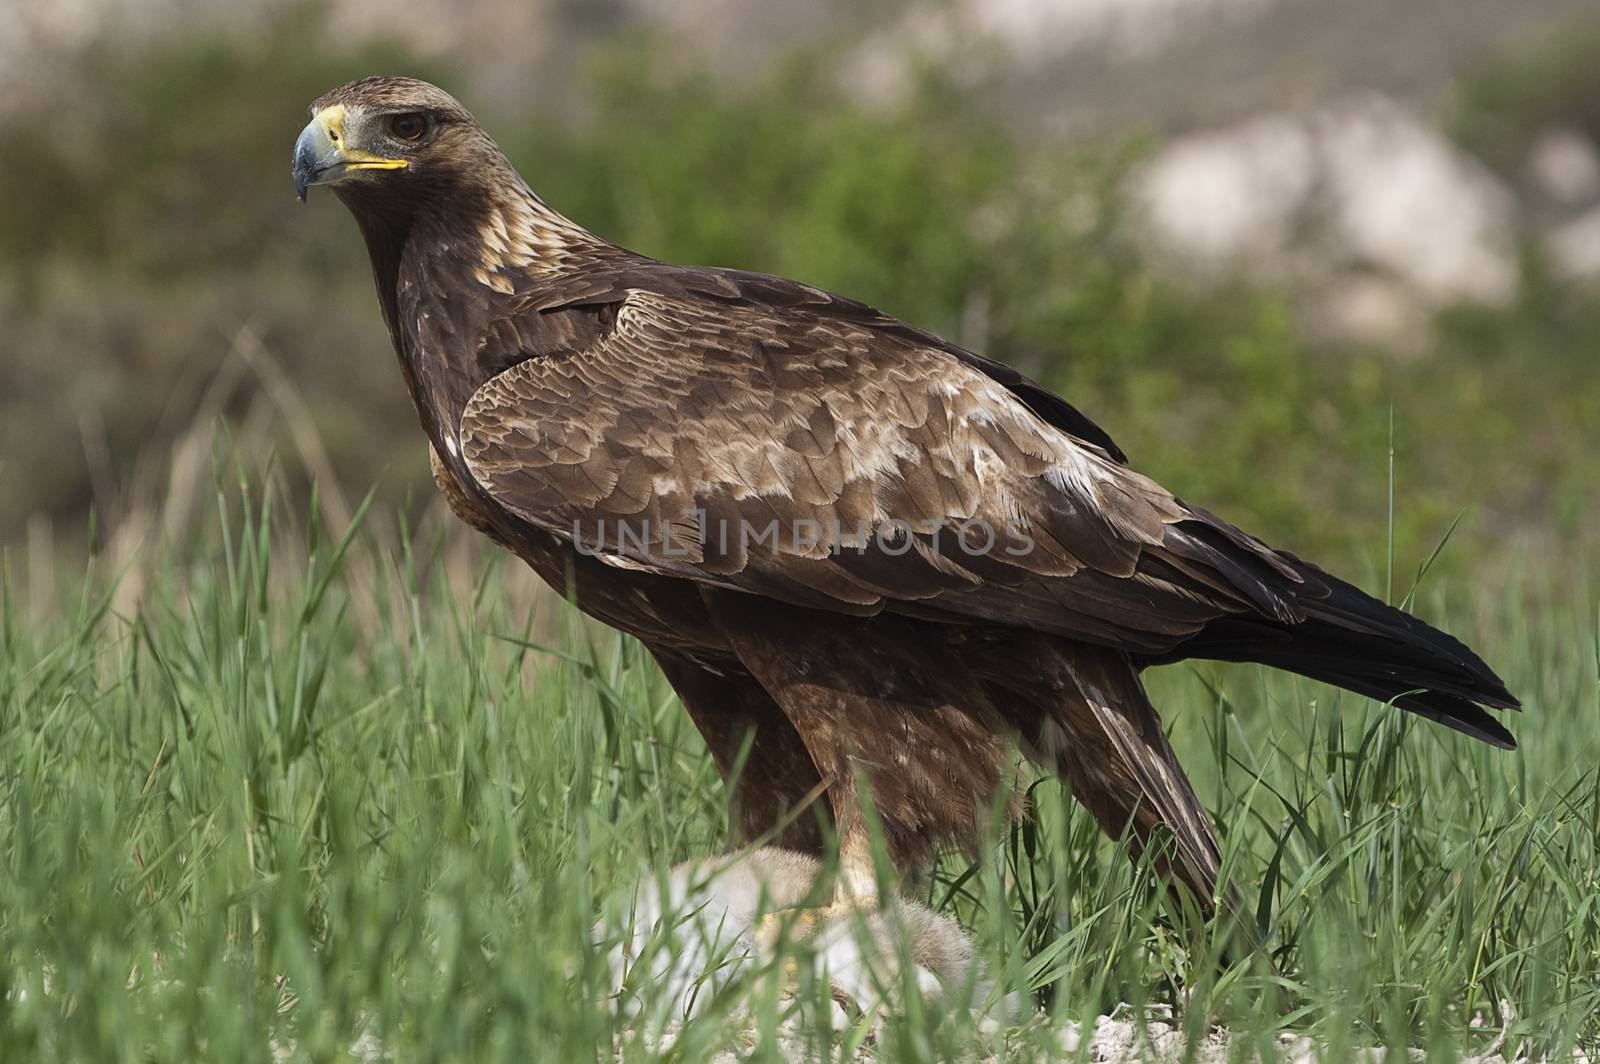 golden eagle (Aquila chrysaetos), with a newly hunted rabbit by jalonsohu@gmail.com